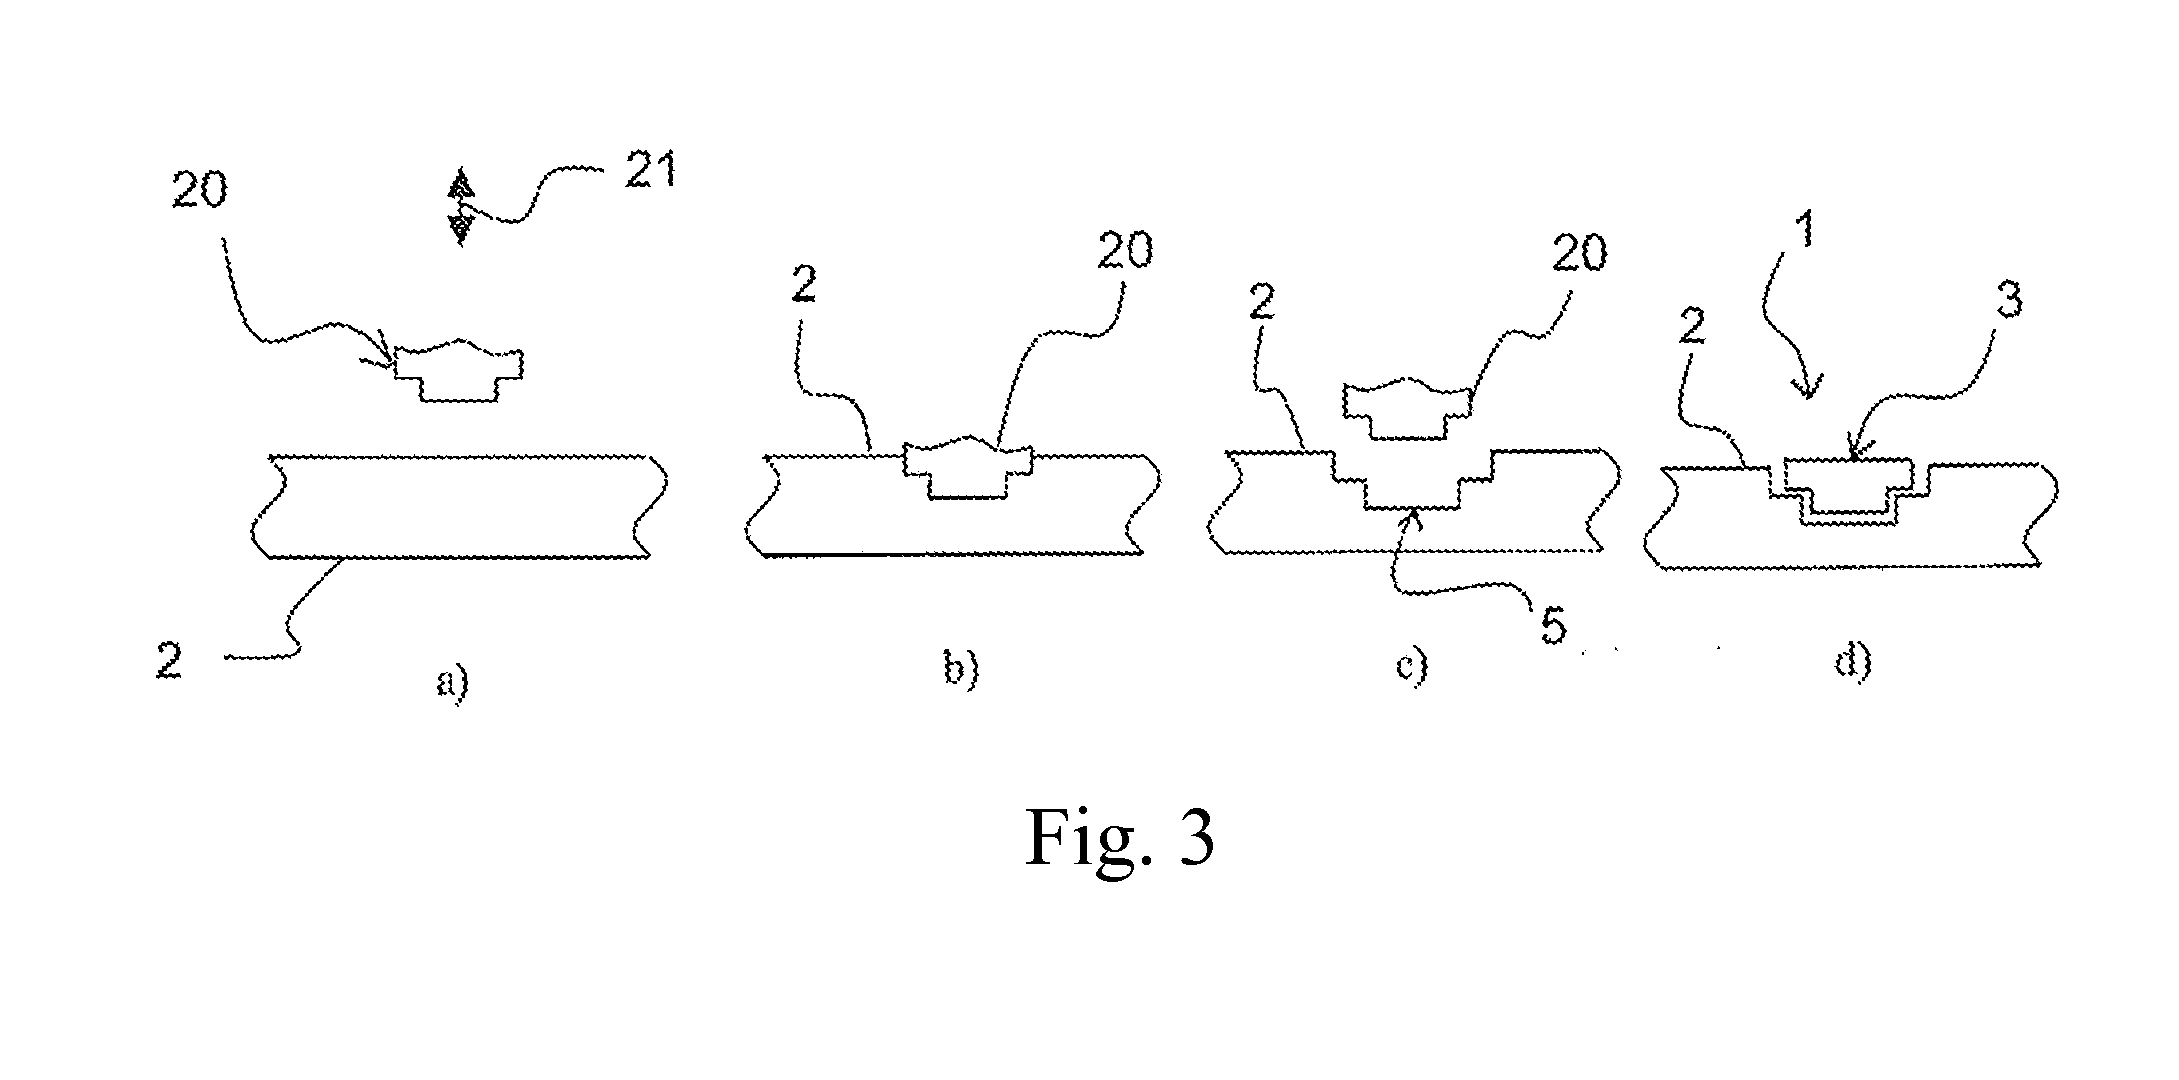 Fibrous insert consisting of a single layer and equipped with a contactless communication electronic device